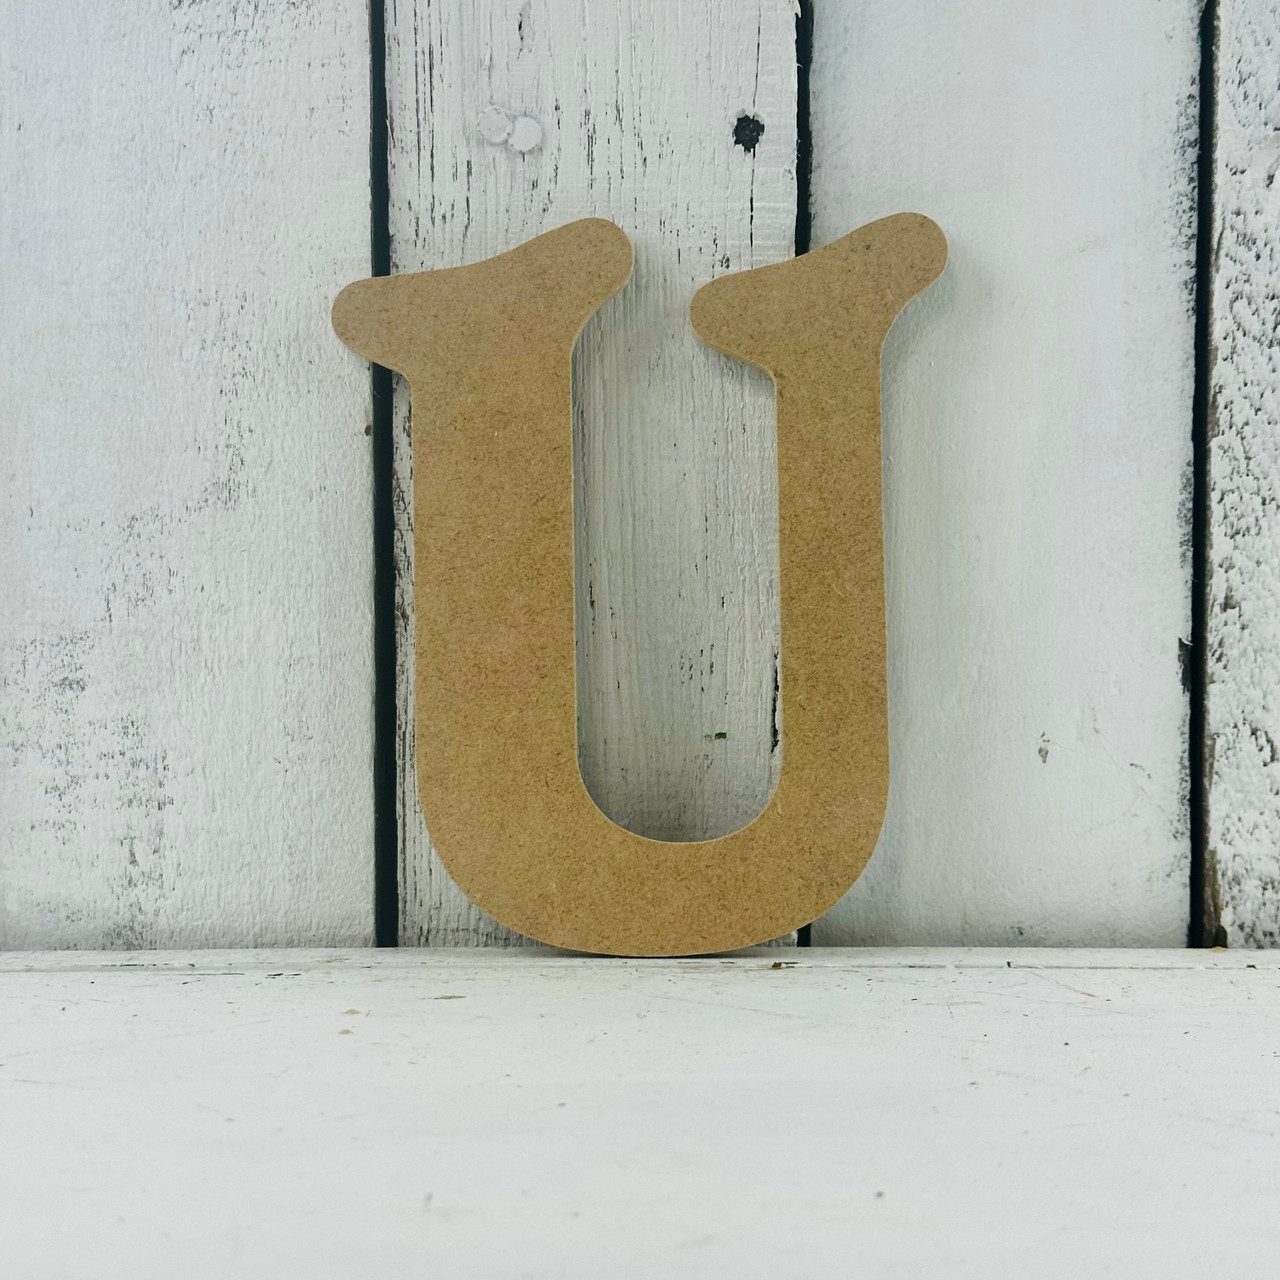 Unfinished Wooden Letters and Numbers Wall Décor Alphabet Beltorian